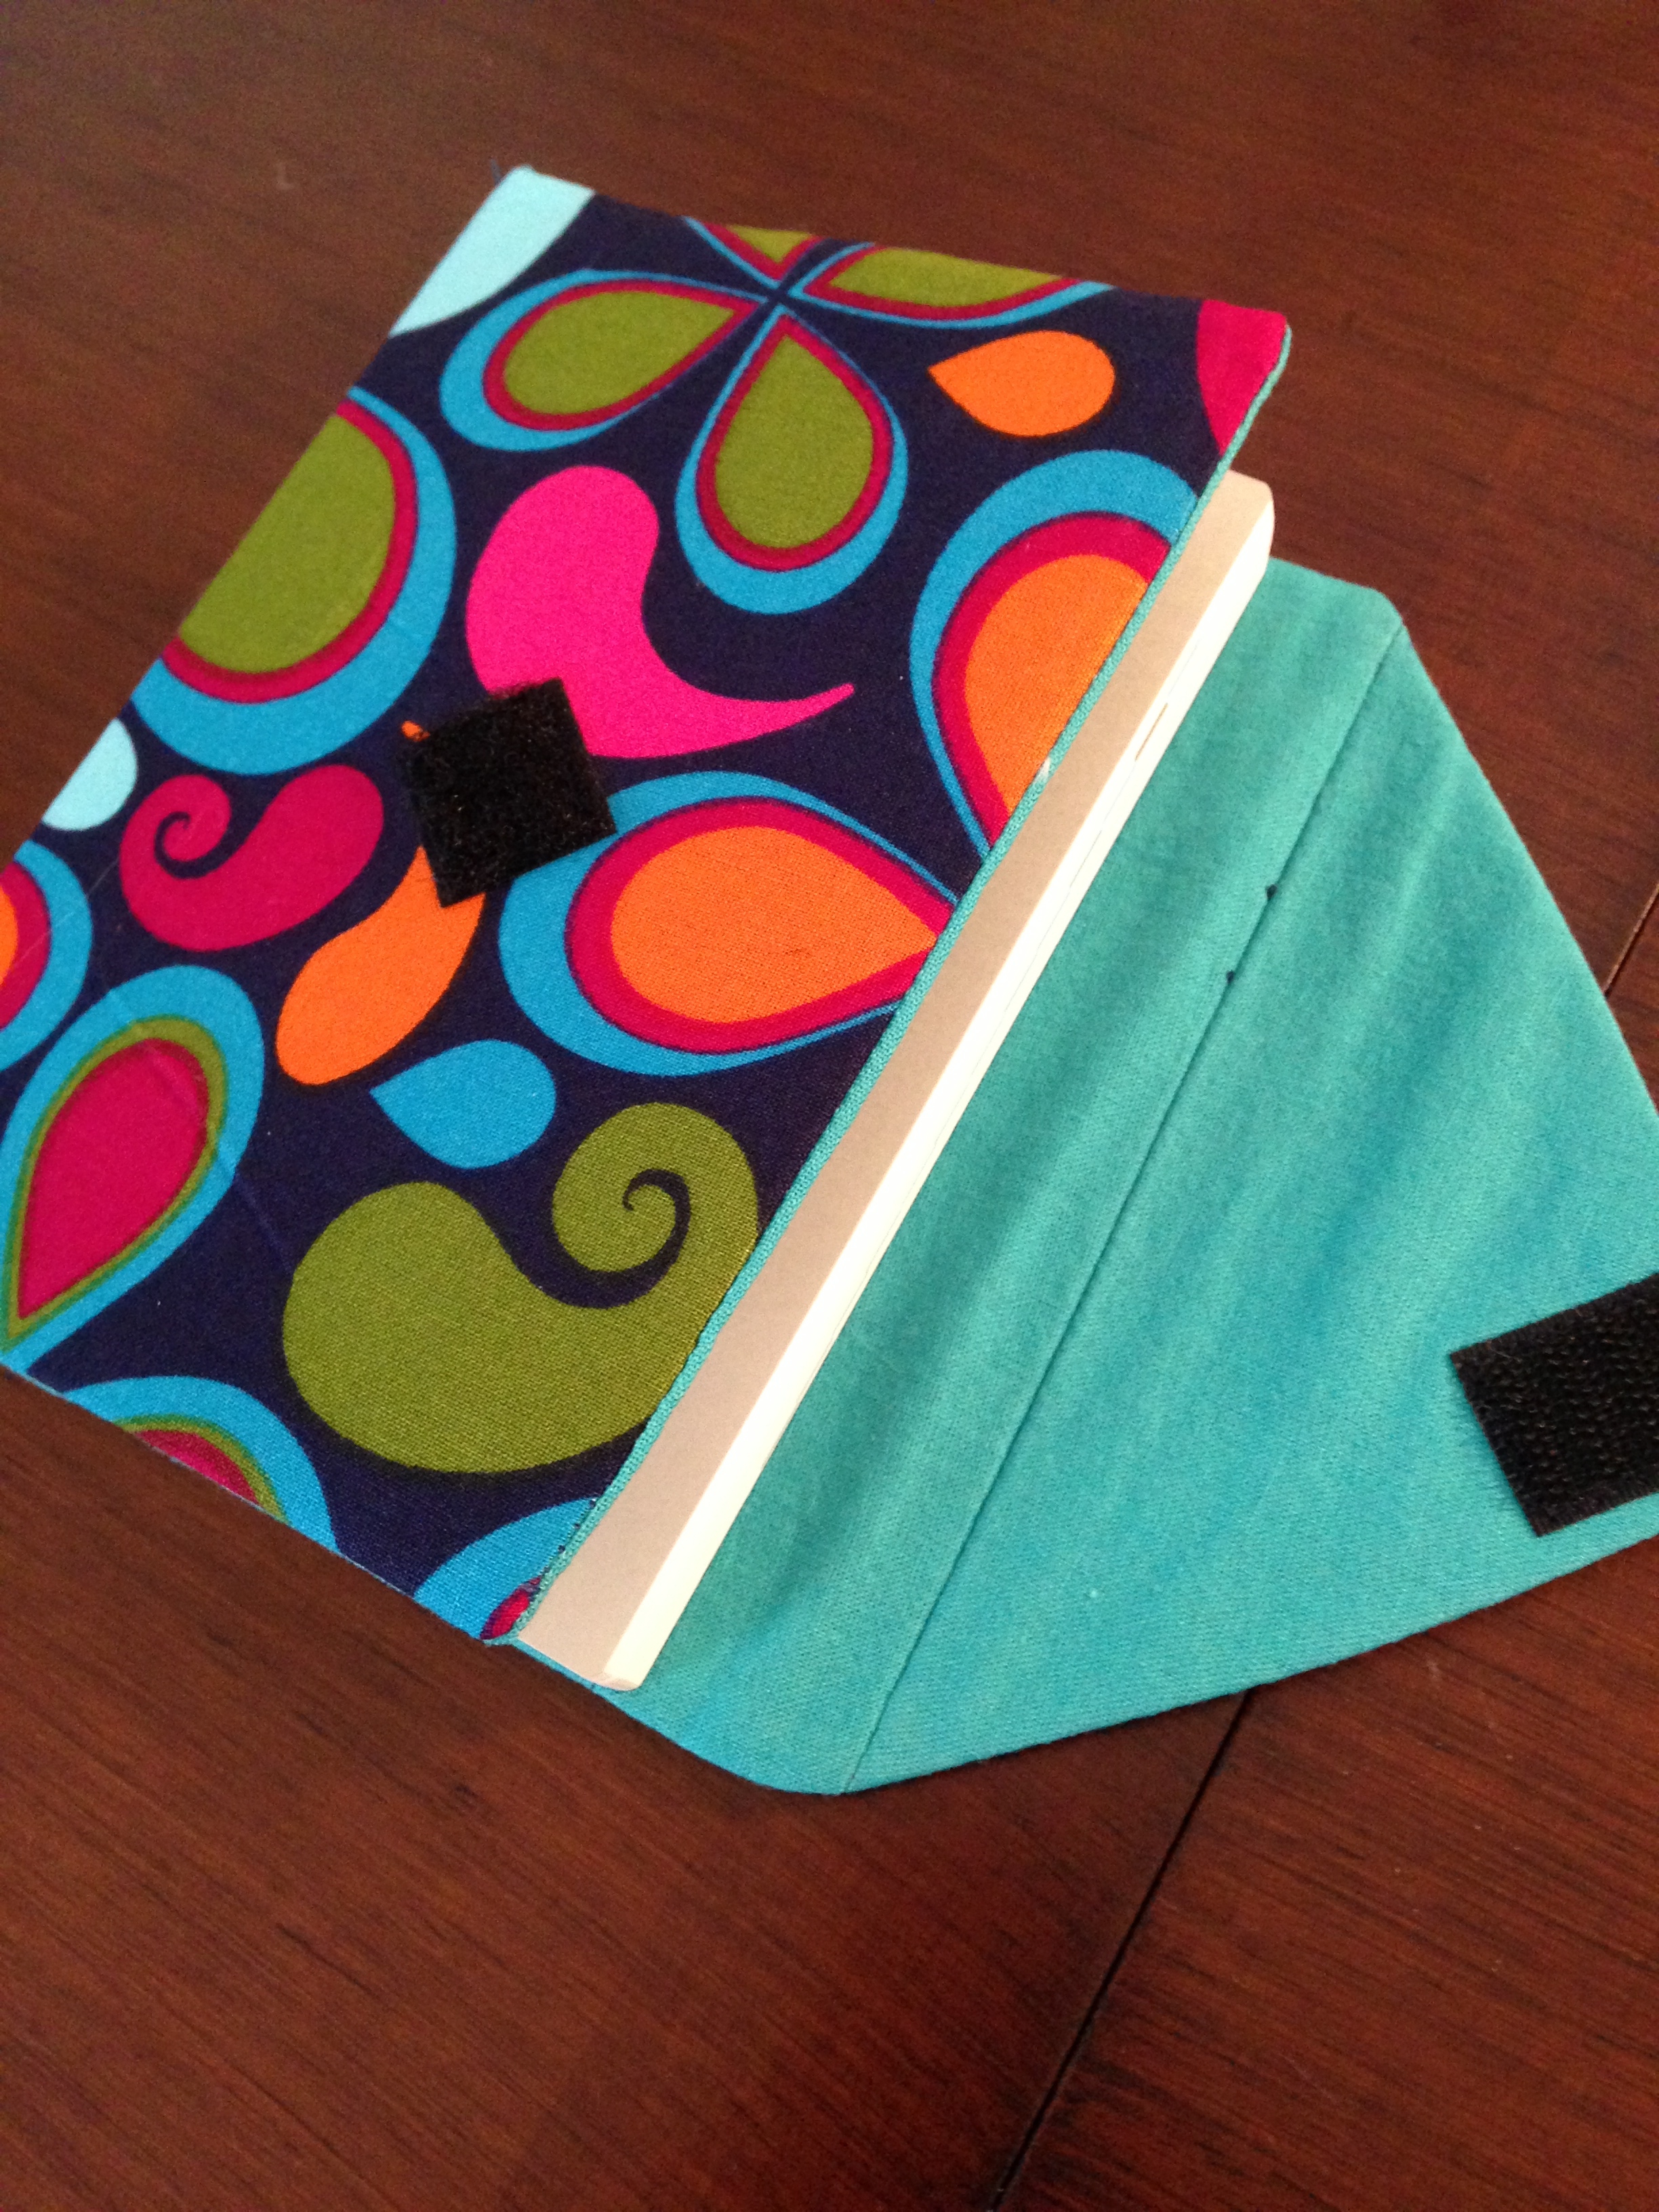 The finished techo cover, open with techo inside.